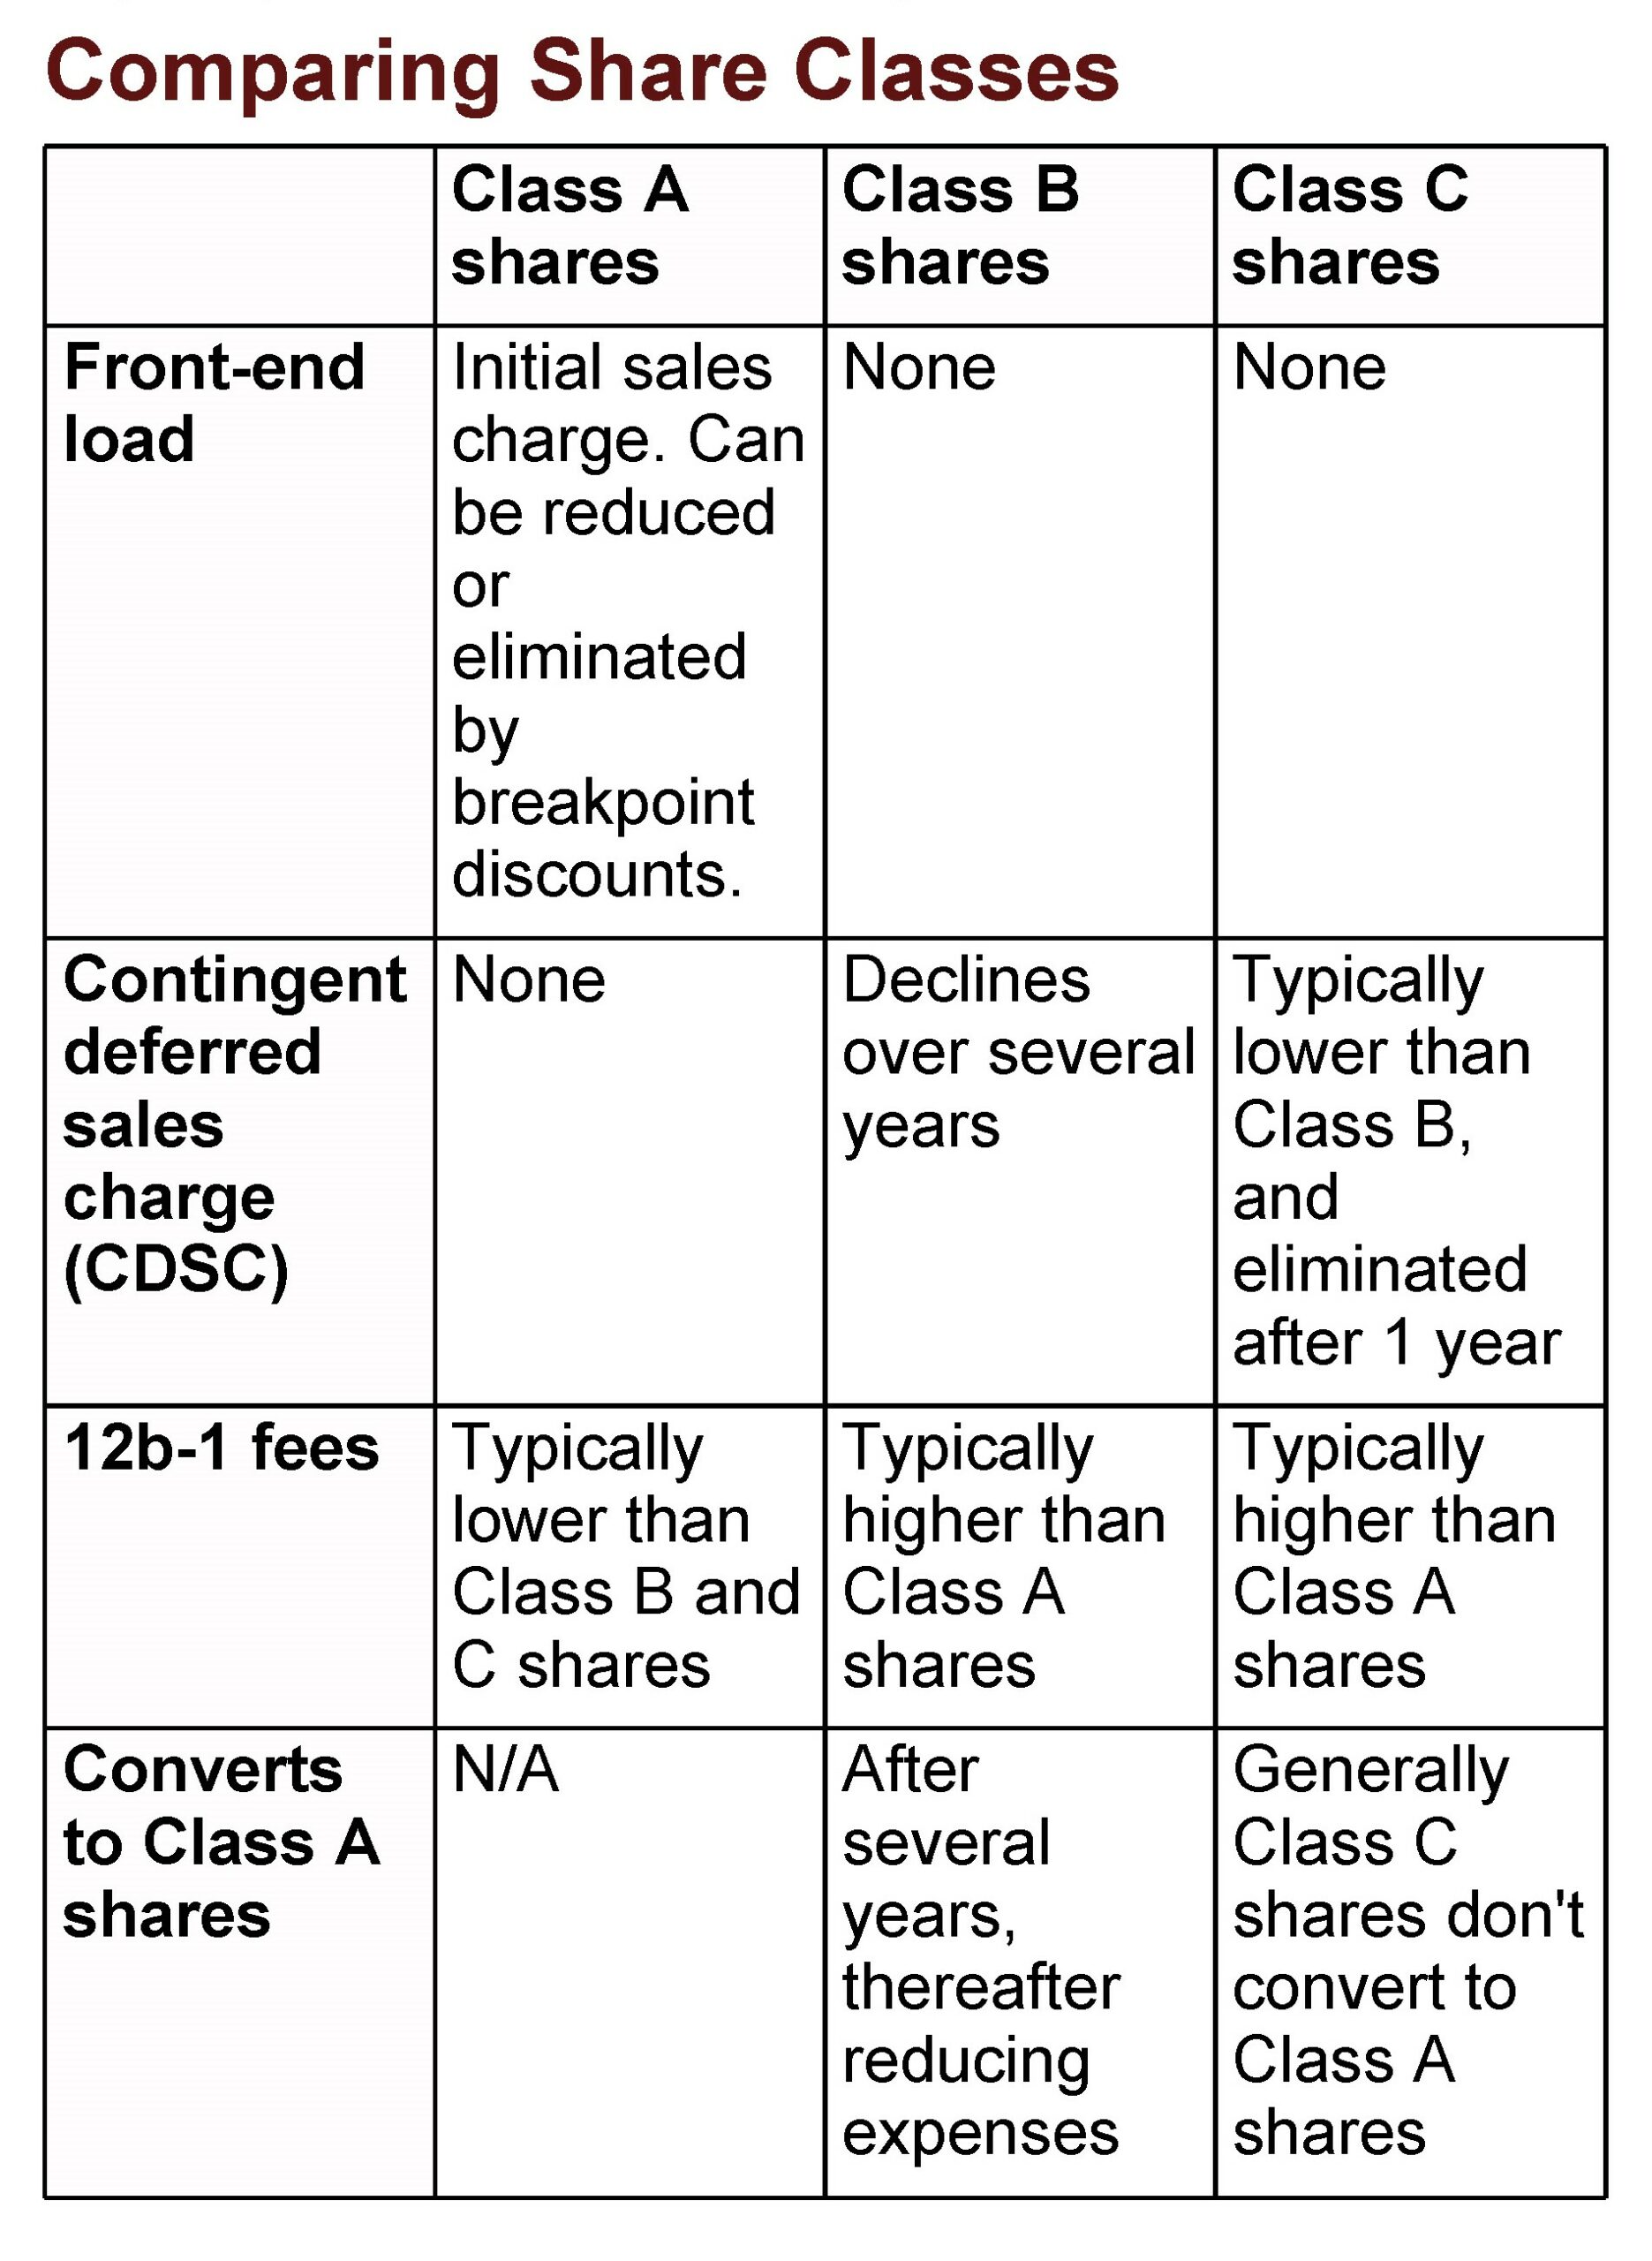 Chart: Comparing Share Classes Class A shares Class B shares Class C shares Front-end load Initial sales charge. Can be reduced or eliminated by breakpoint discounts. None None Contingent deferred sales charge (CDSC) None Declines over several years Typically lower than Class B, and eliminated after 1 year 12b-1 fees Typically lower than Class B and C shares Typically higher than Class A shares Typically higher than Class A shares Converts to Class A shares N/A After several years, thereafter reducing expenses Generally Class C shares don't convert to Class A shares Article title: The ABCs of Mutual Fund Share Classes